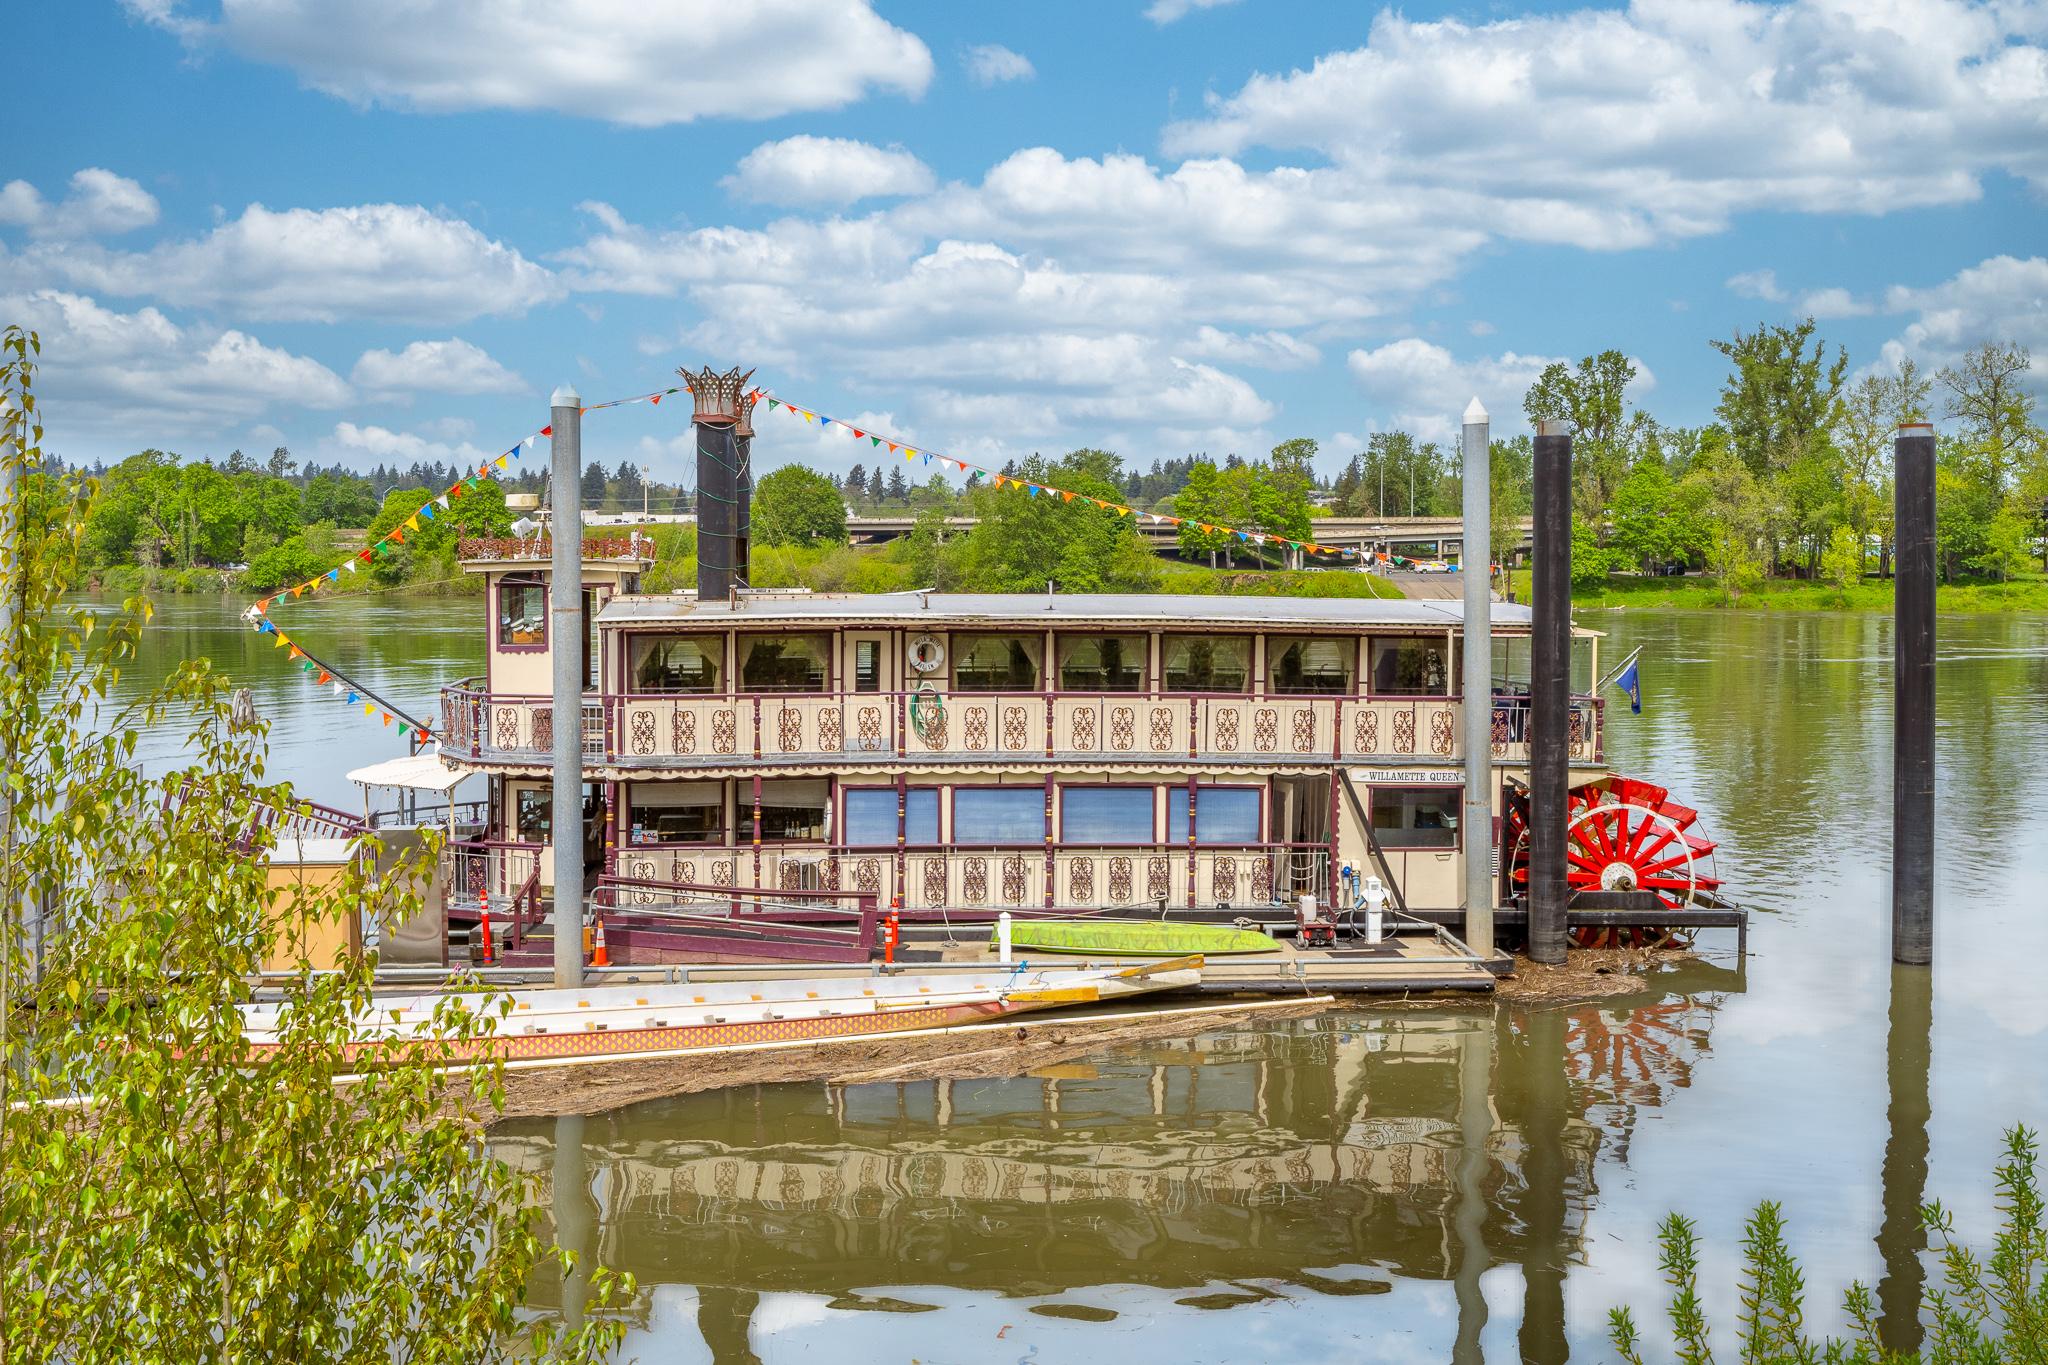 Explore Turnkey river business!